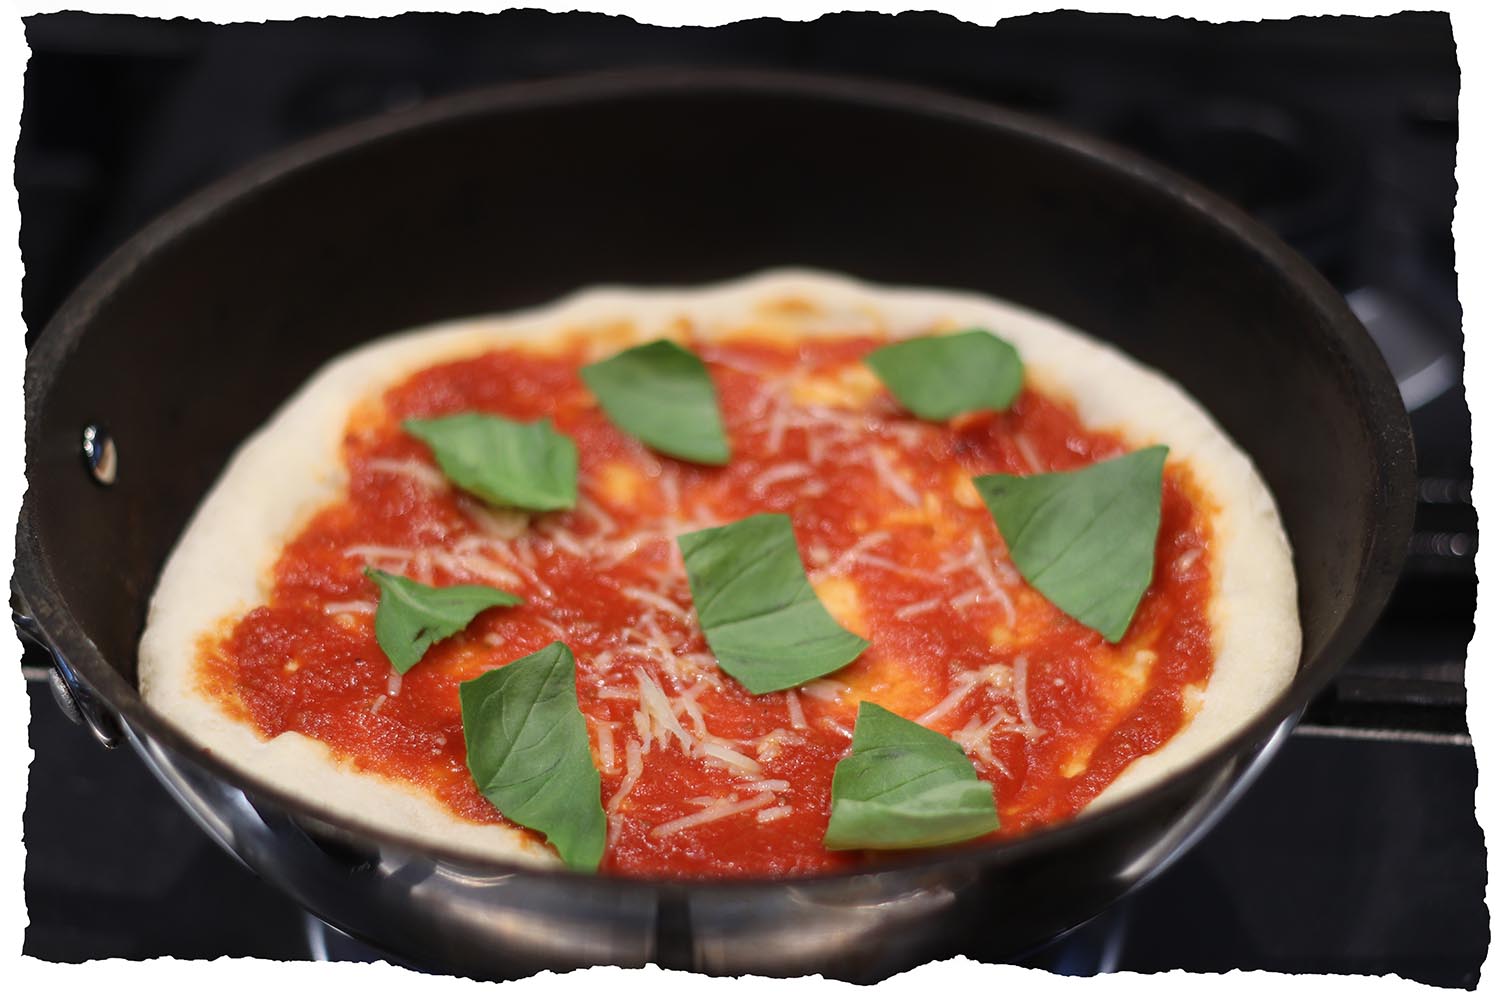 Add basil to your pizza